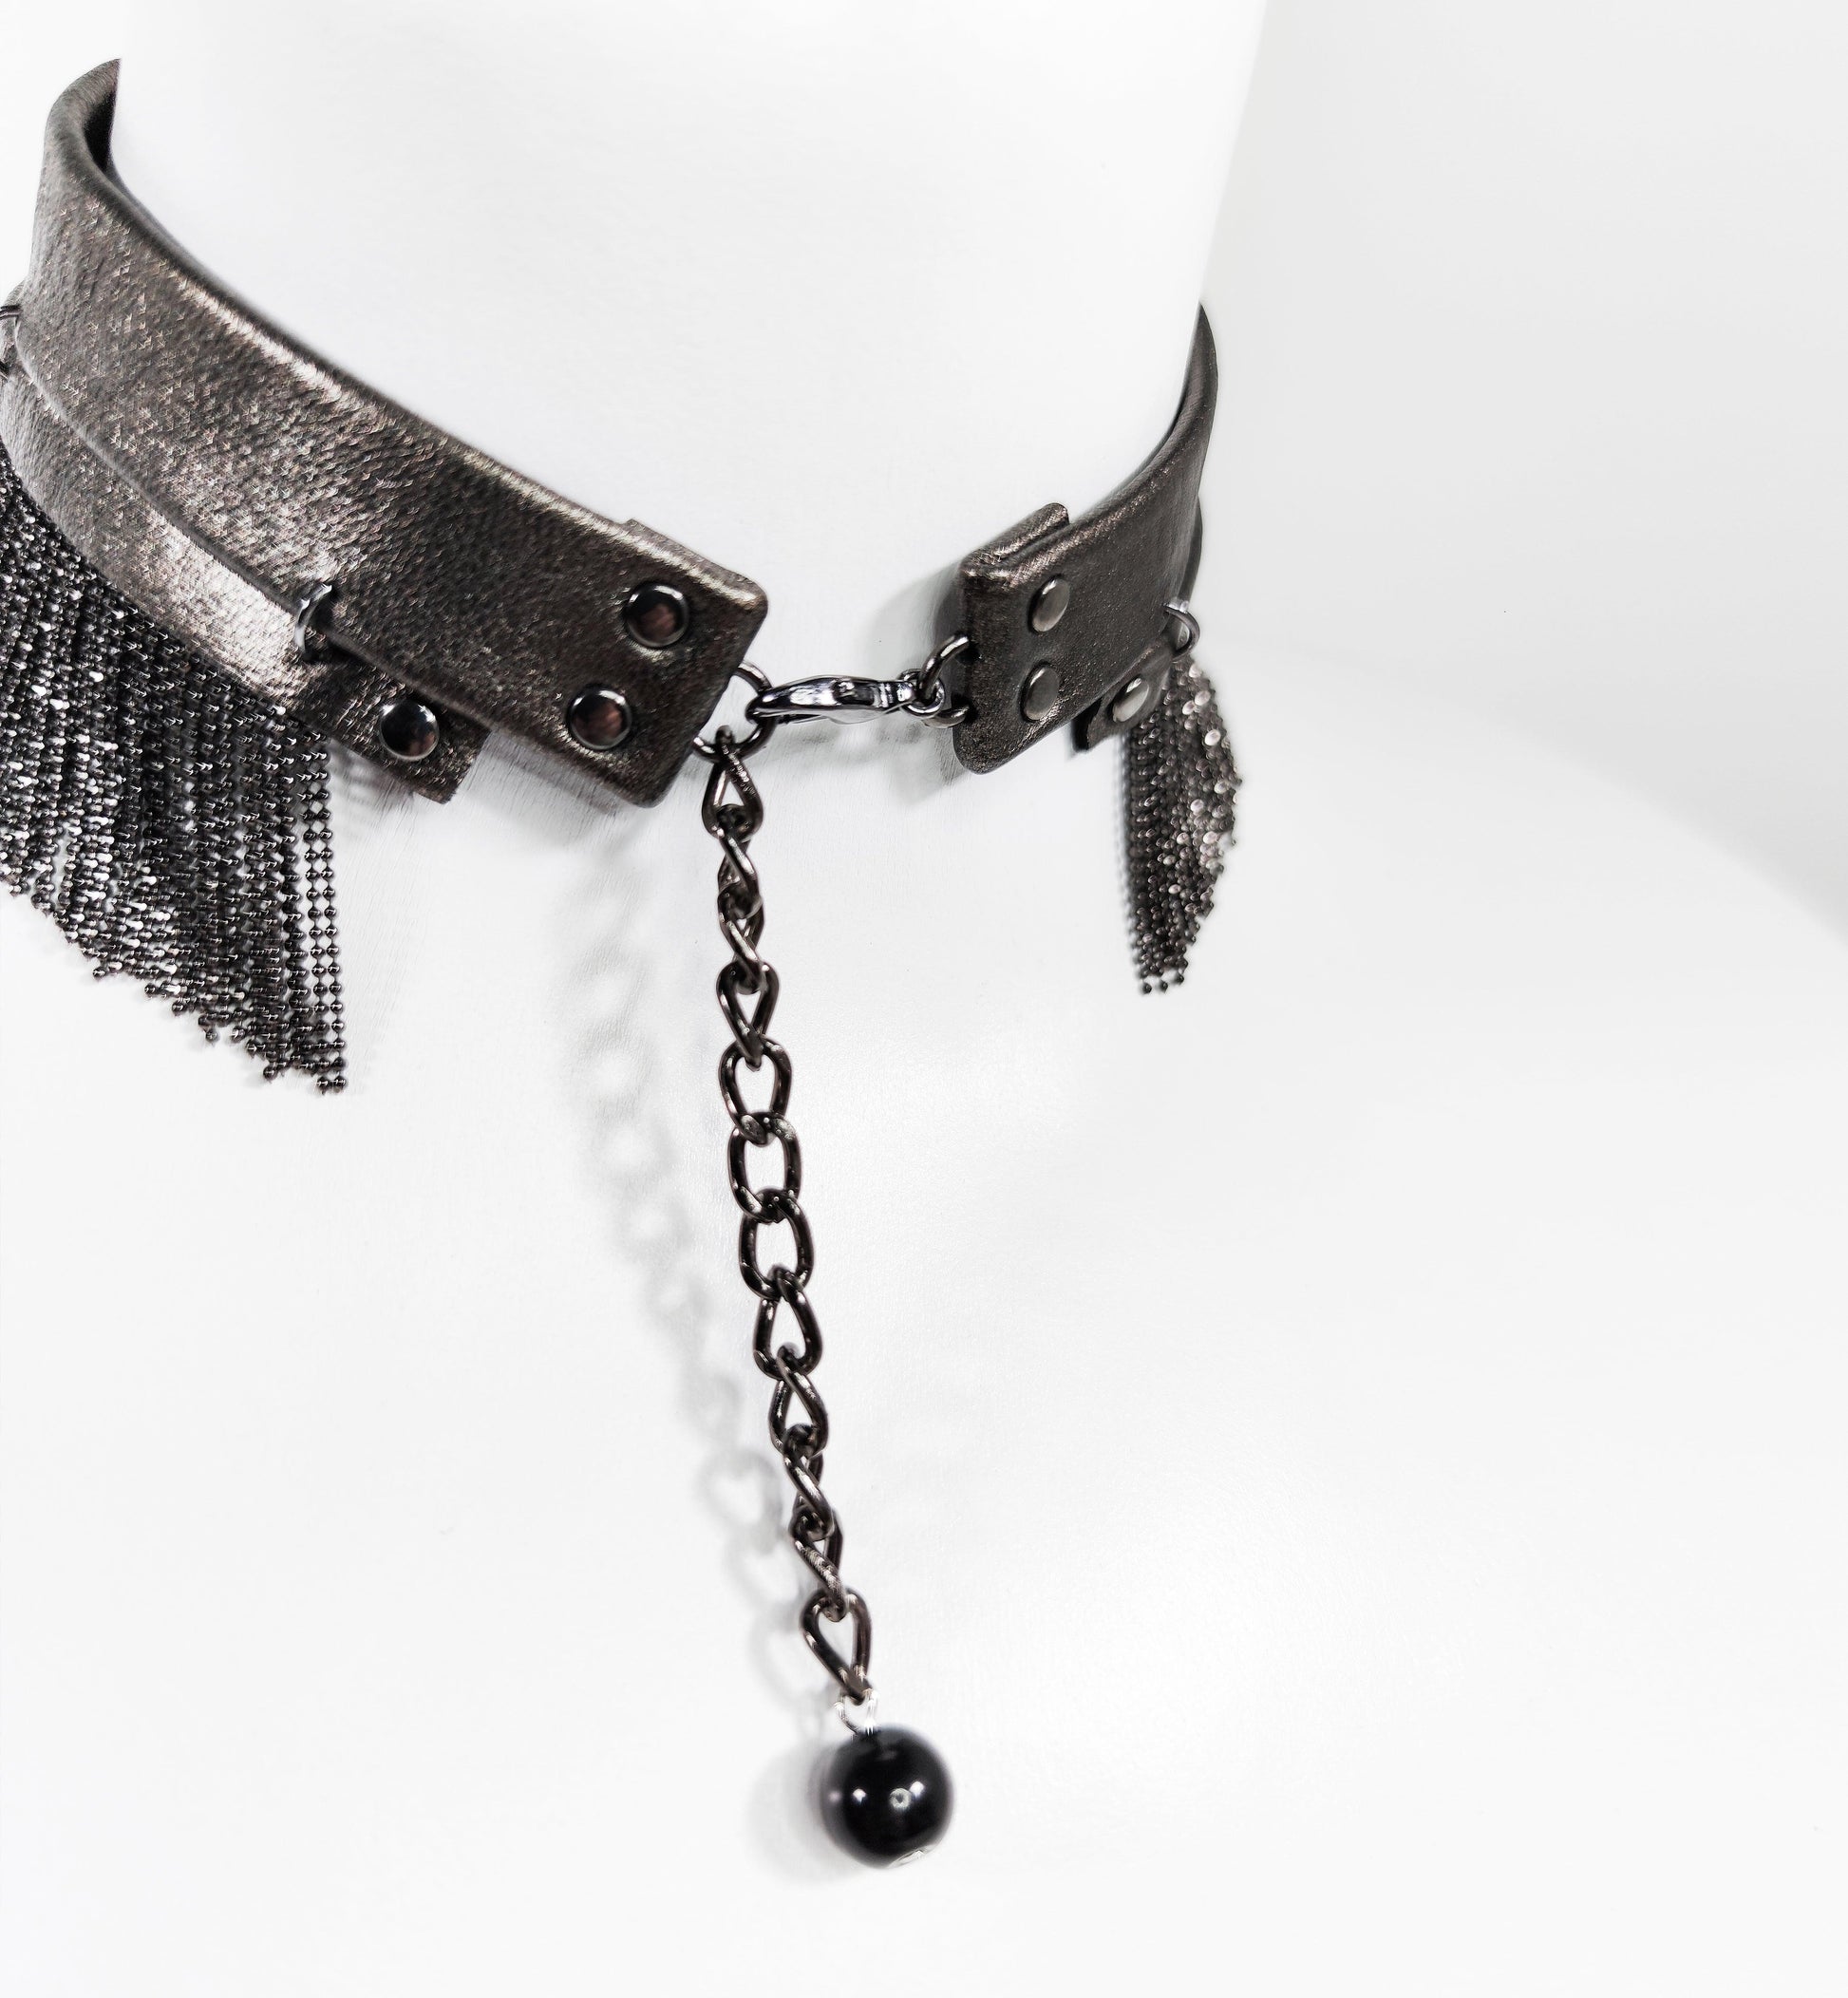 Exquisite detail of Axinia Short Leather Chocker with Chains showcasing the fine craftsmanship and elegant design characteristic of Axinia Collection 's luxury collection.